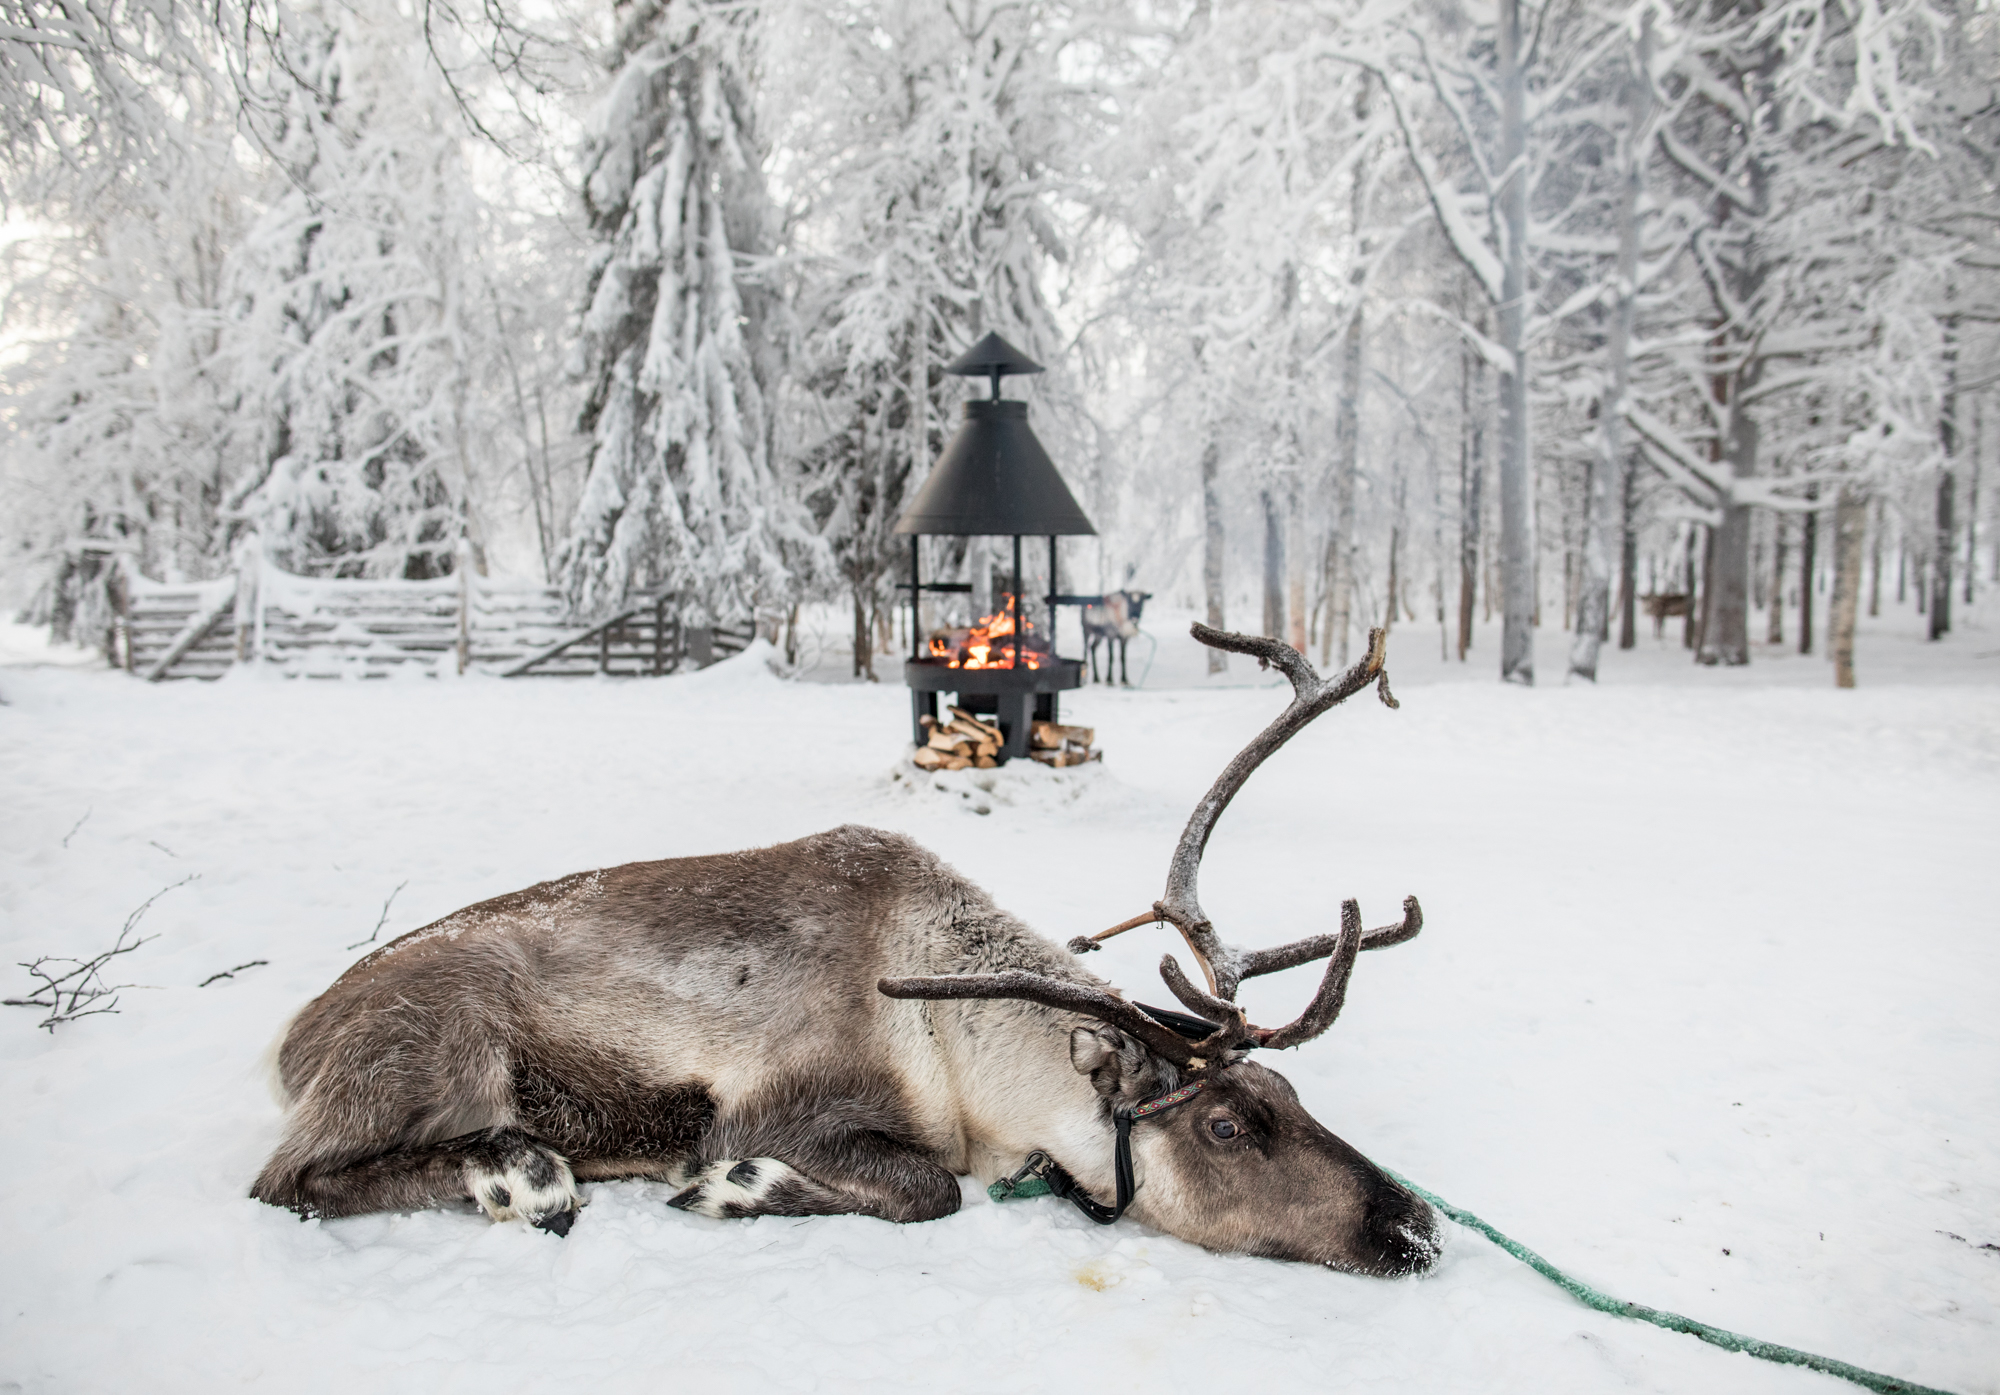   Levi, Finland  - A reindeer rests between carriage rides belonging to the Sami people.  The Sami are an indigenous people of Northern Europe and historically are best known for reindeer herding. 